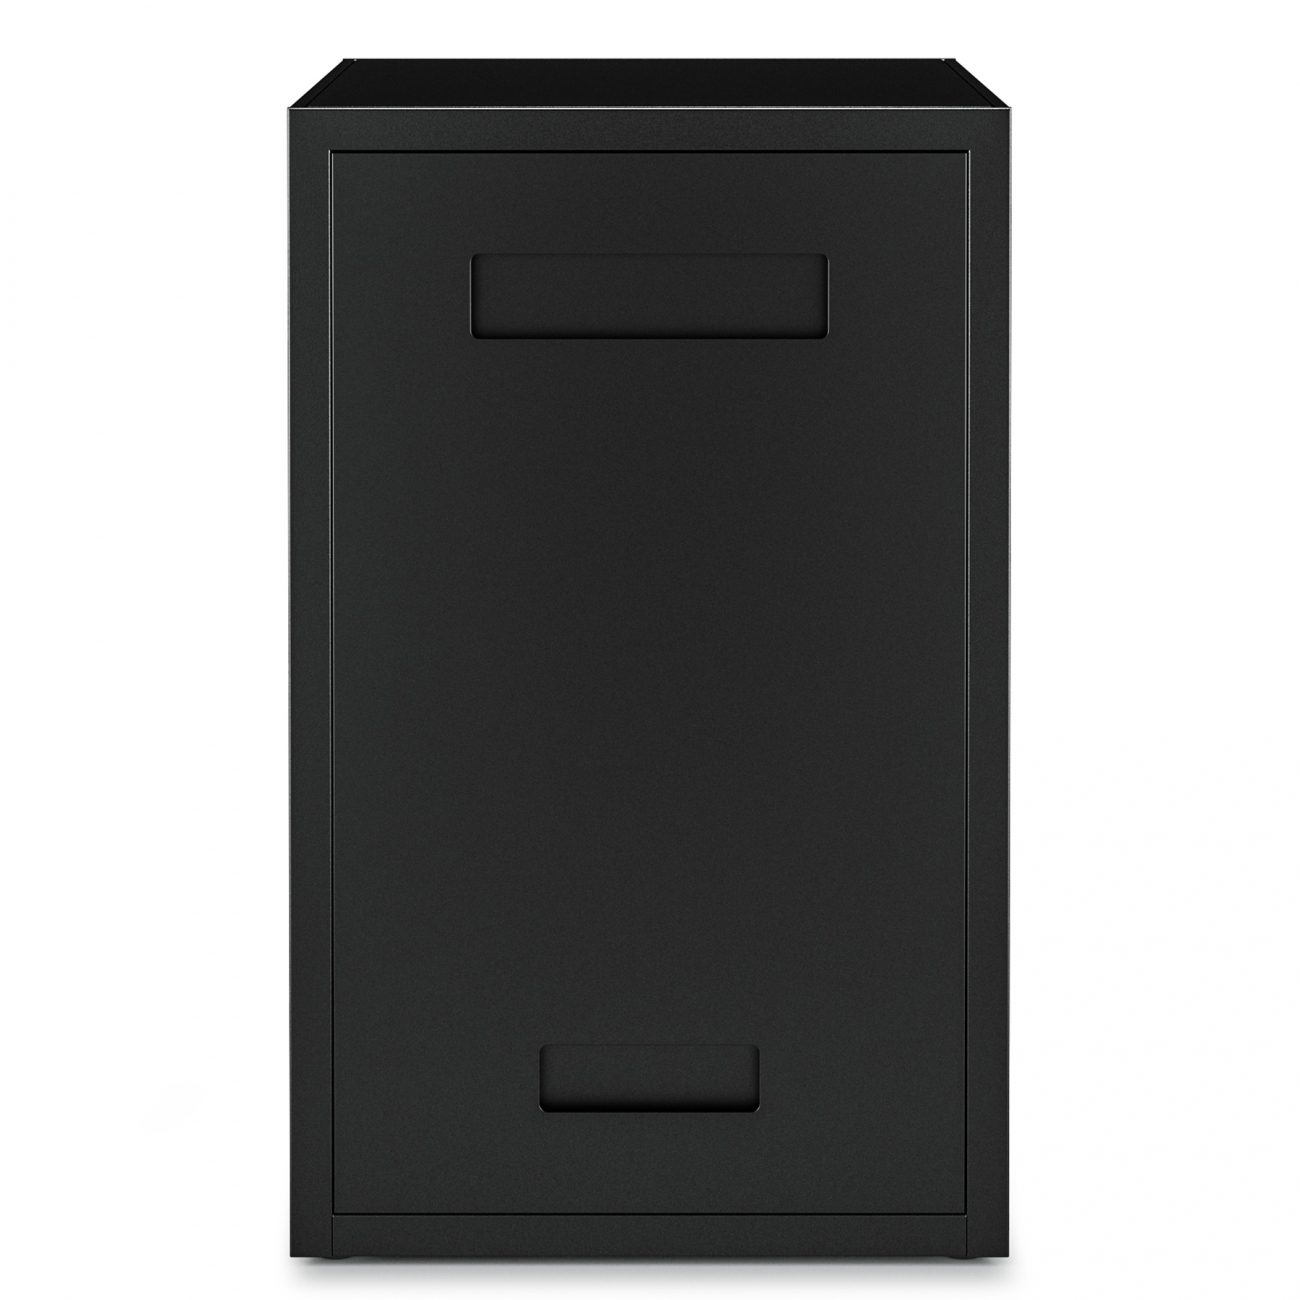 Röshults Open Kitchen Cabinet f. Tank 50 Anthracite